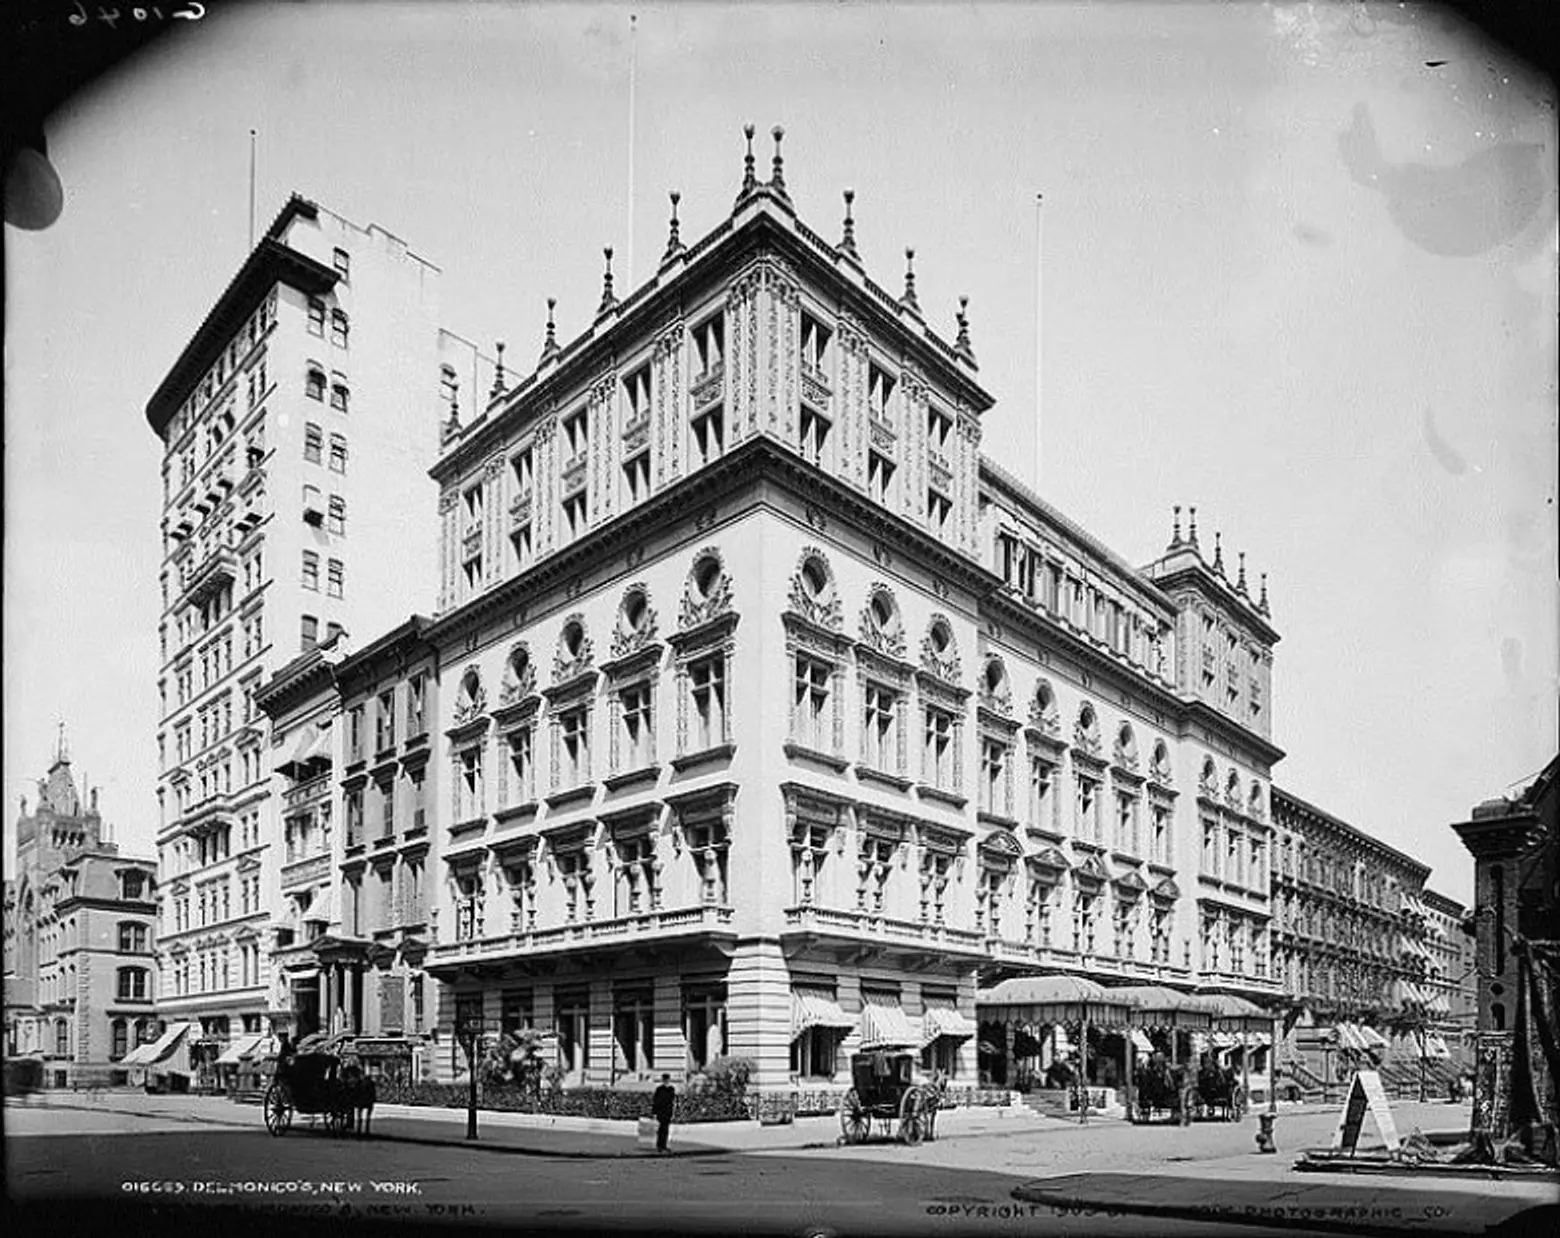 150 years ago, Delmonico’s became the first restaurant to serve women unaccompanied by men